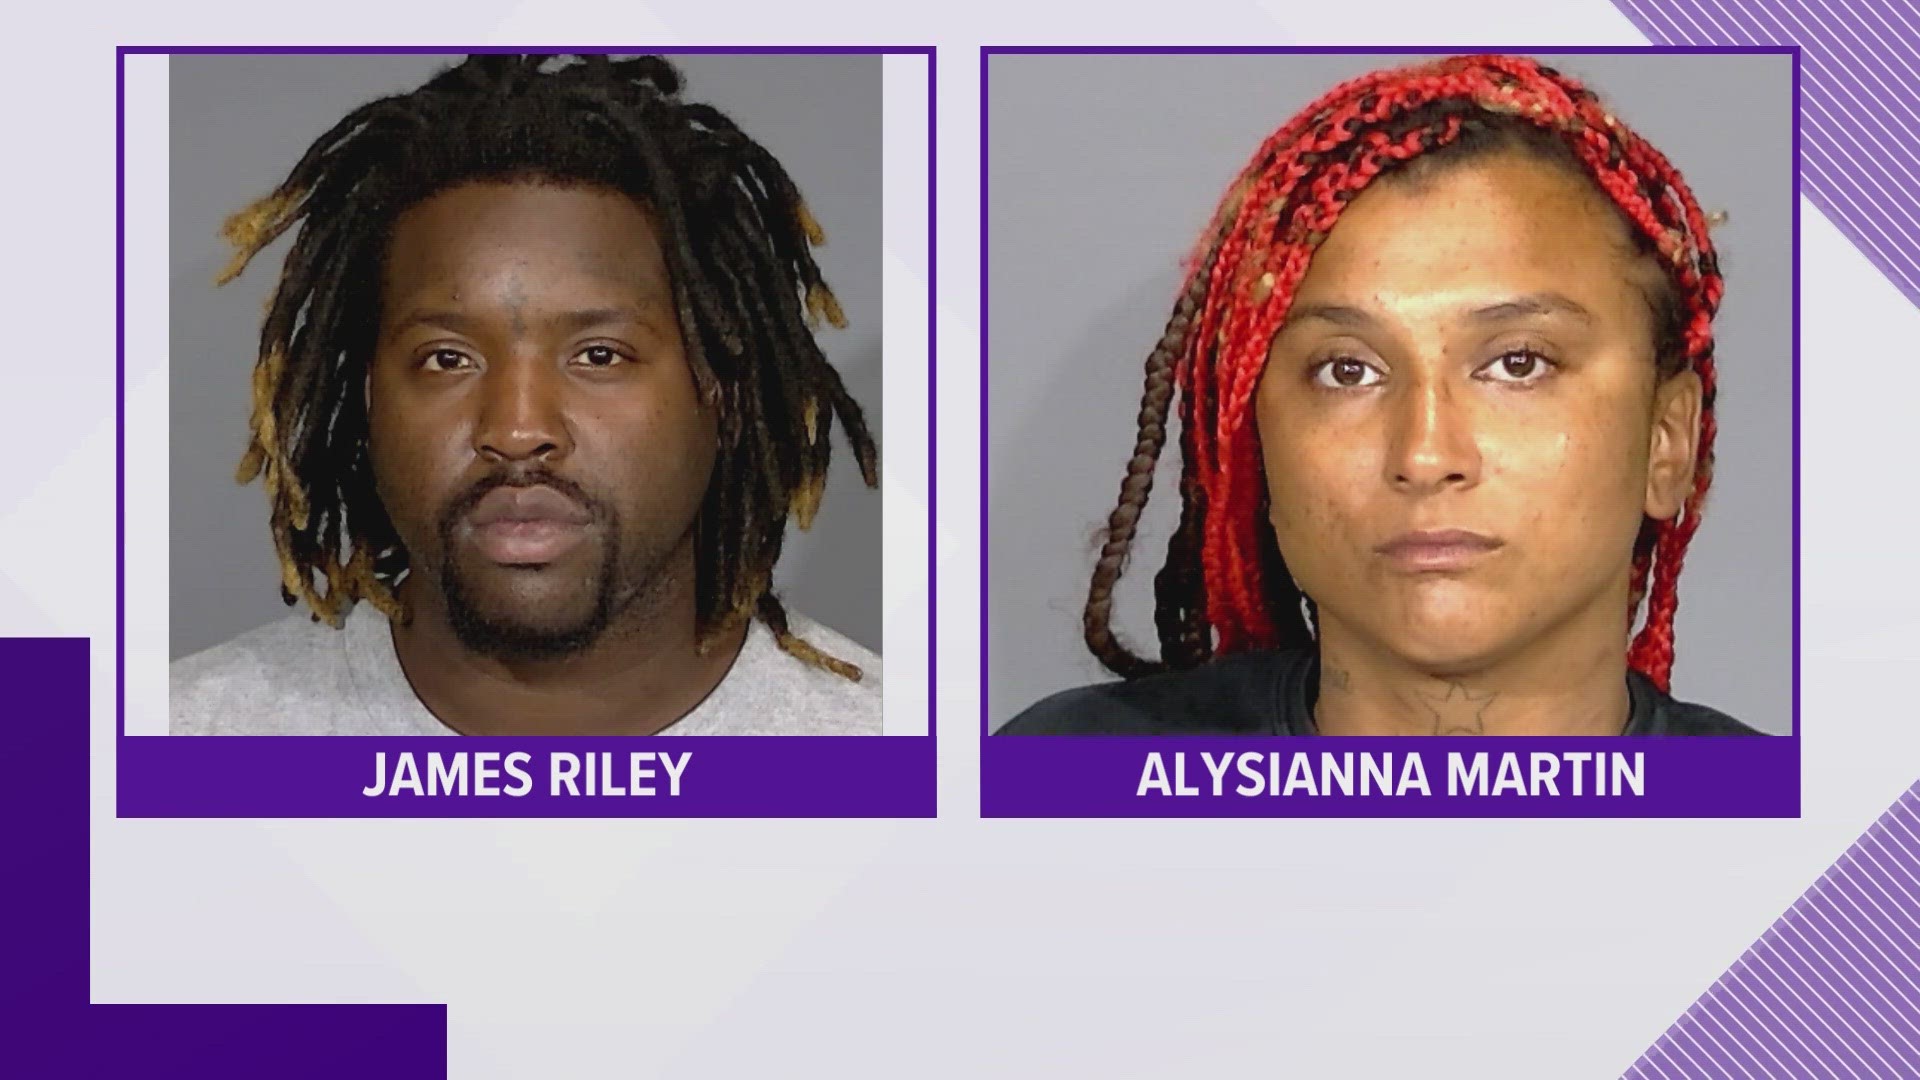 James Riley will spend 62 years in prison after pleading guilty to murder and kidnapping. Alysi-Anna Martin will spend 30 years in prison.